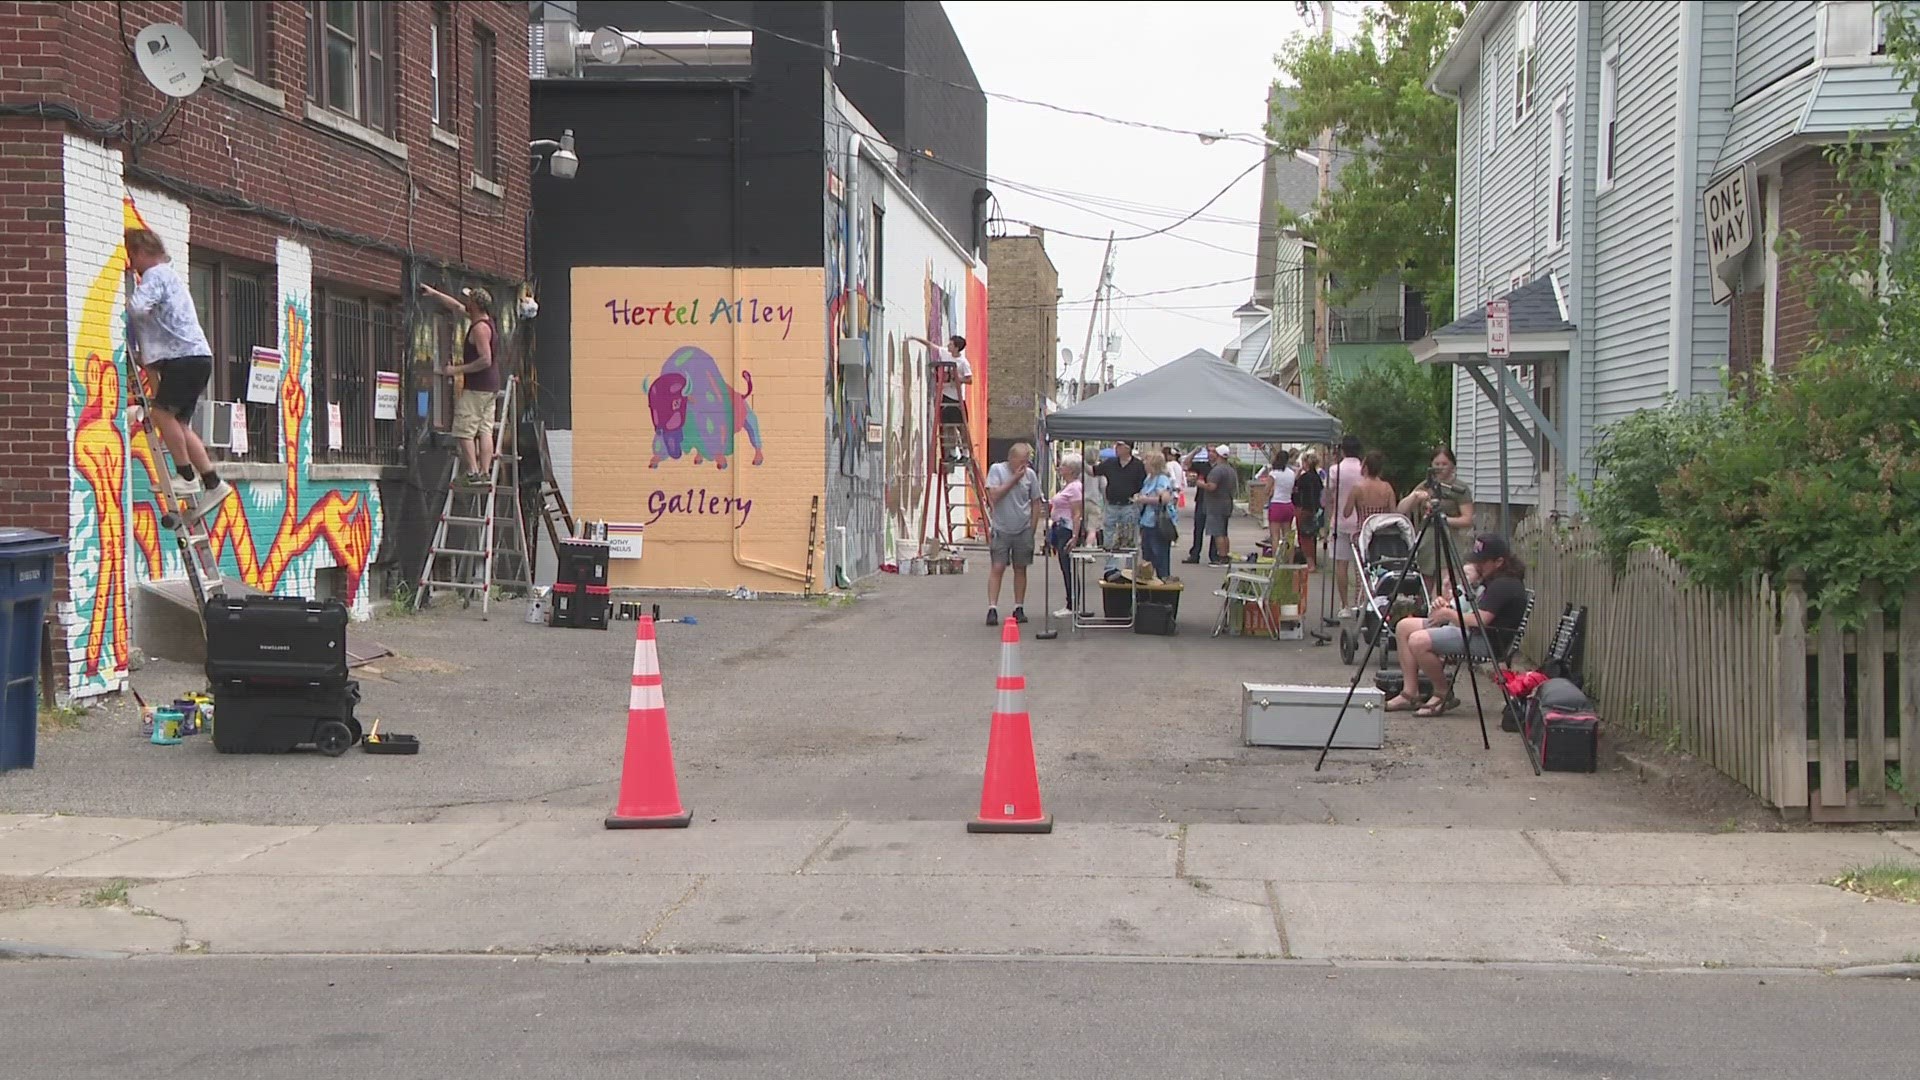 The Hertel Alley Mural Festival gave people a chance to watch mural artists create masterpieces in person